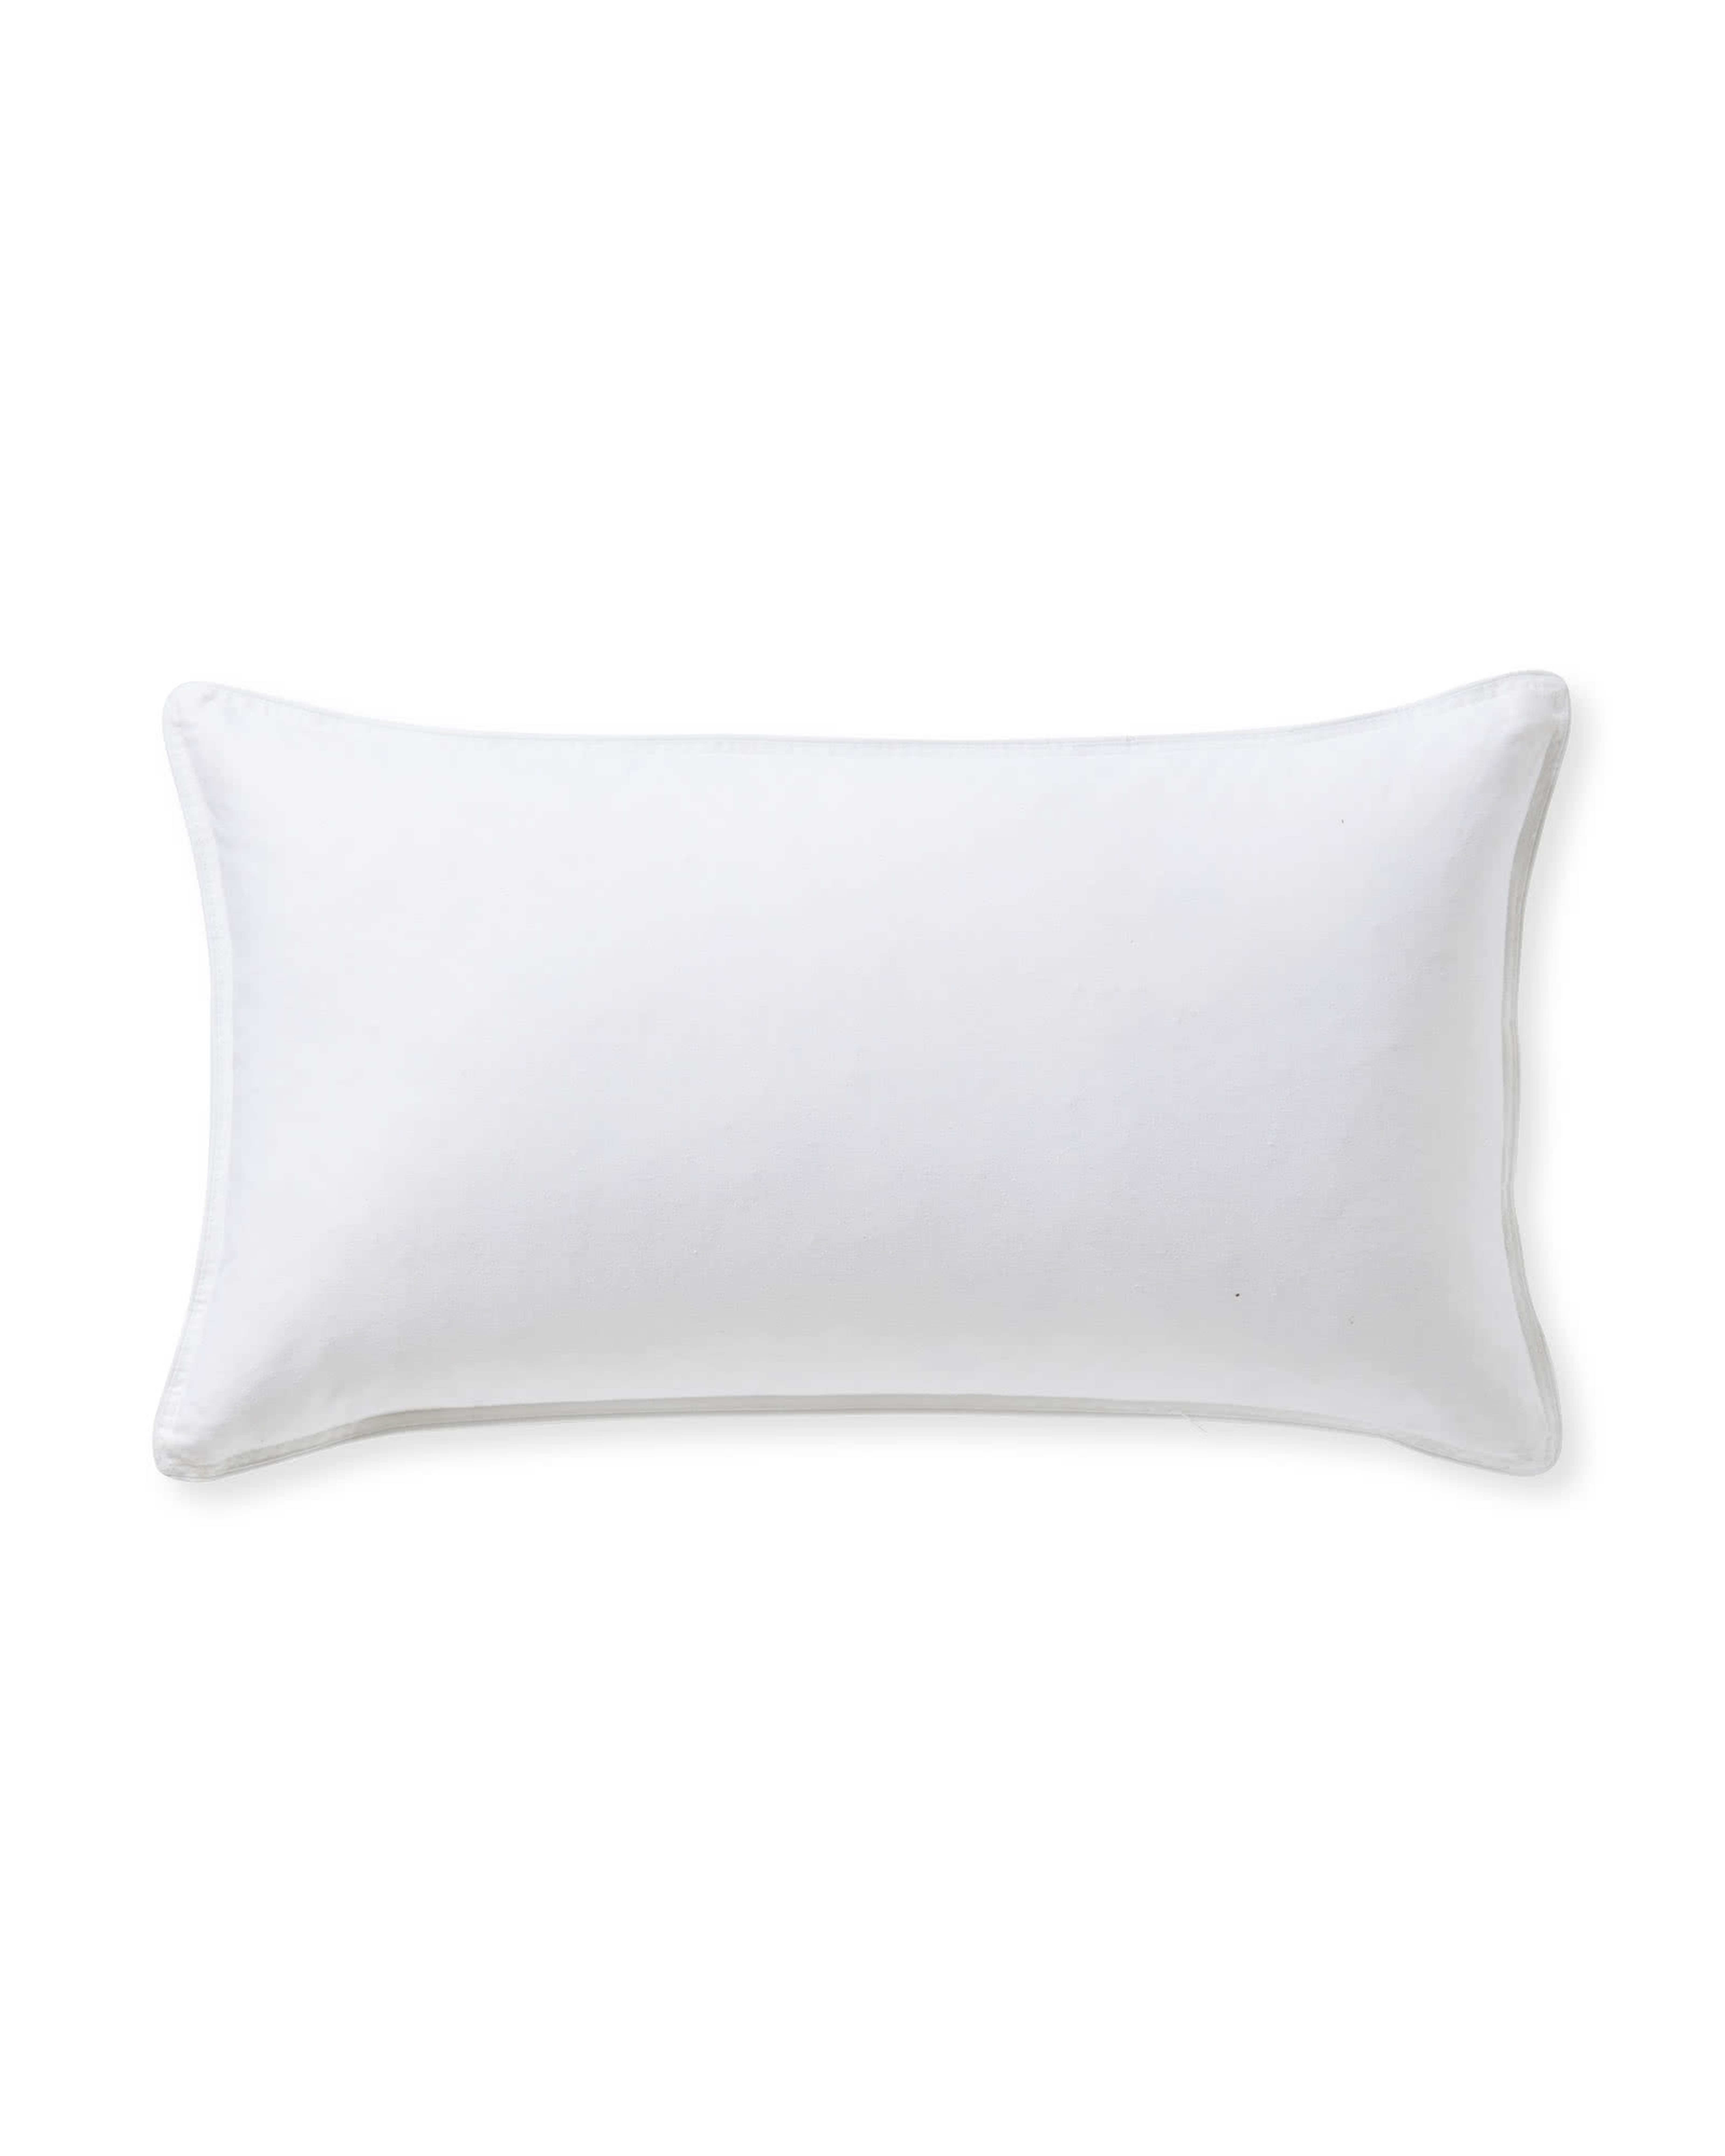 Pillow Inserts 12" x 21" - Serena and Lily